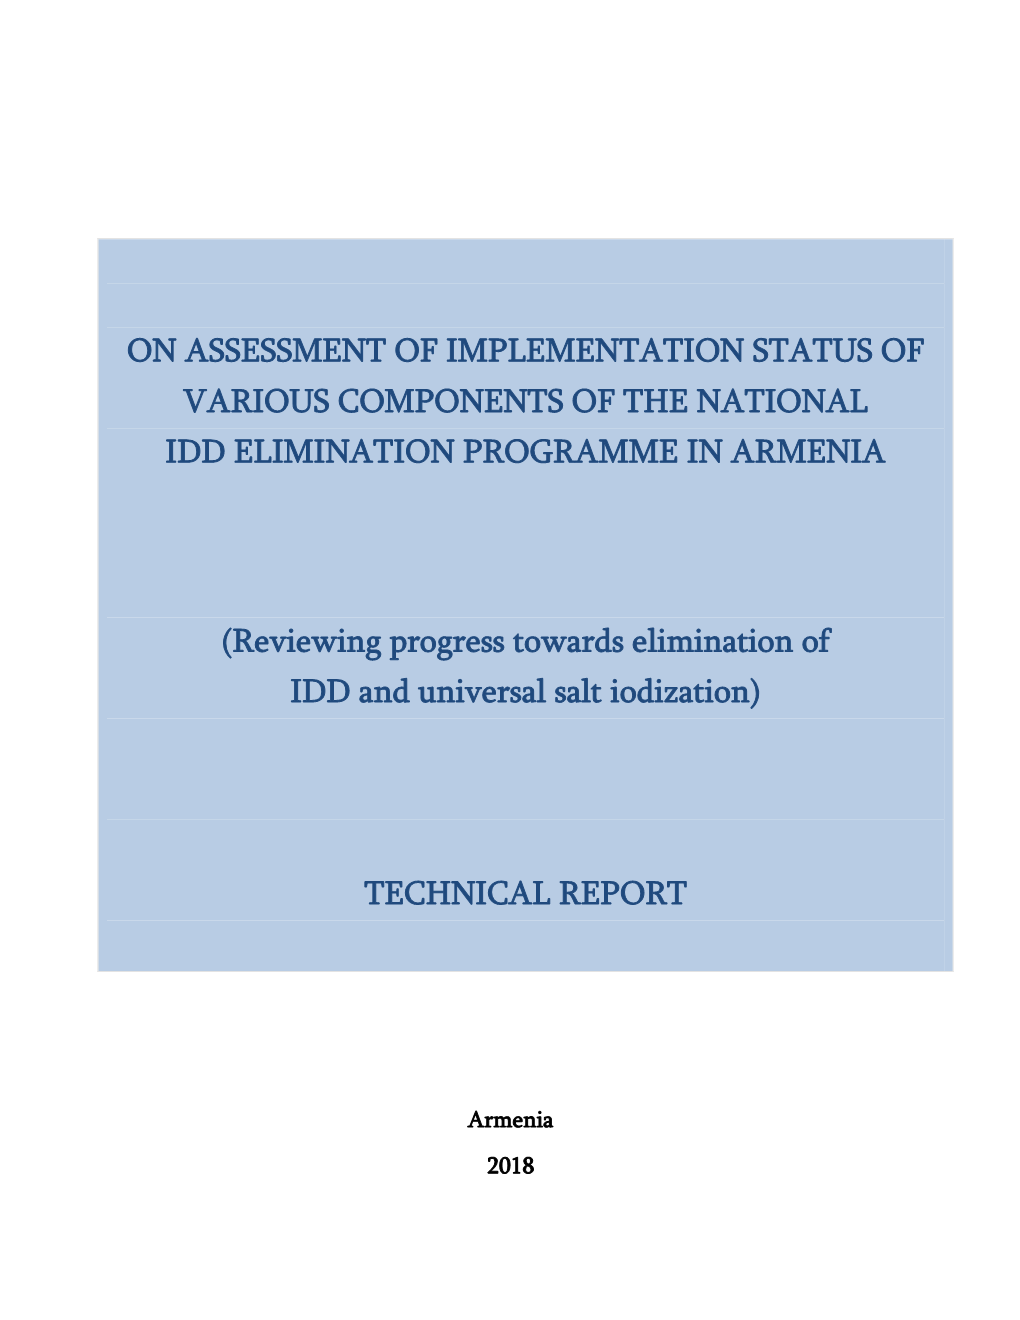 On Assessment of Implementation Status of Various Components of the National Idd Elimination Programme in Armenia